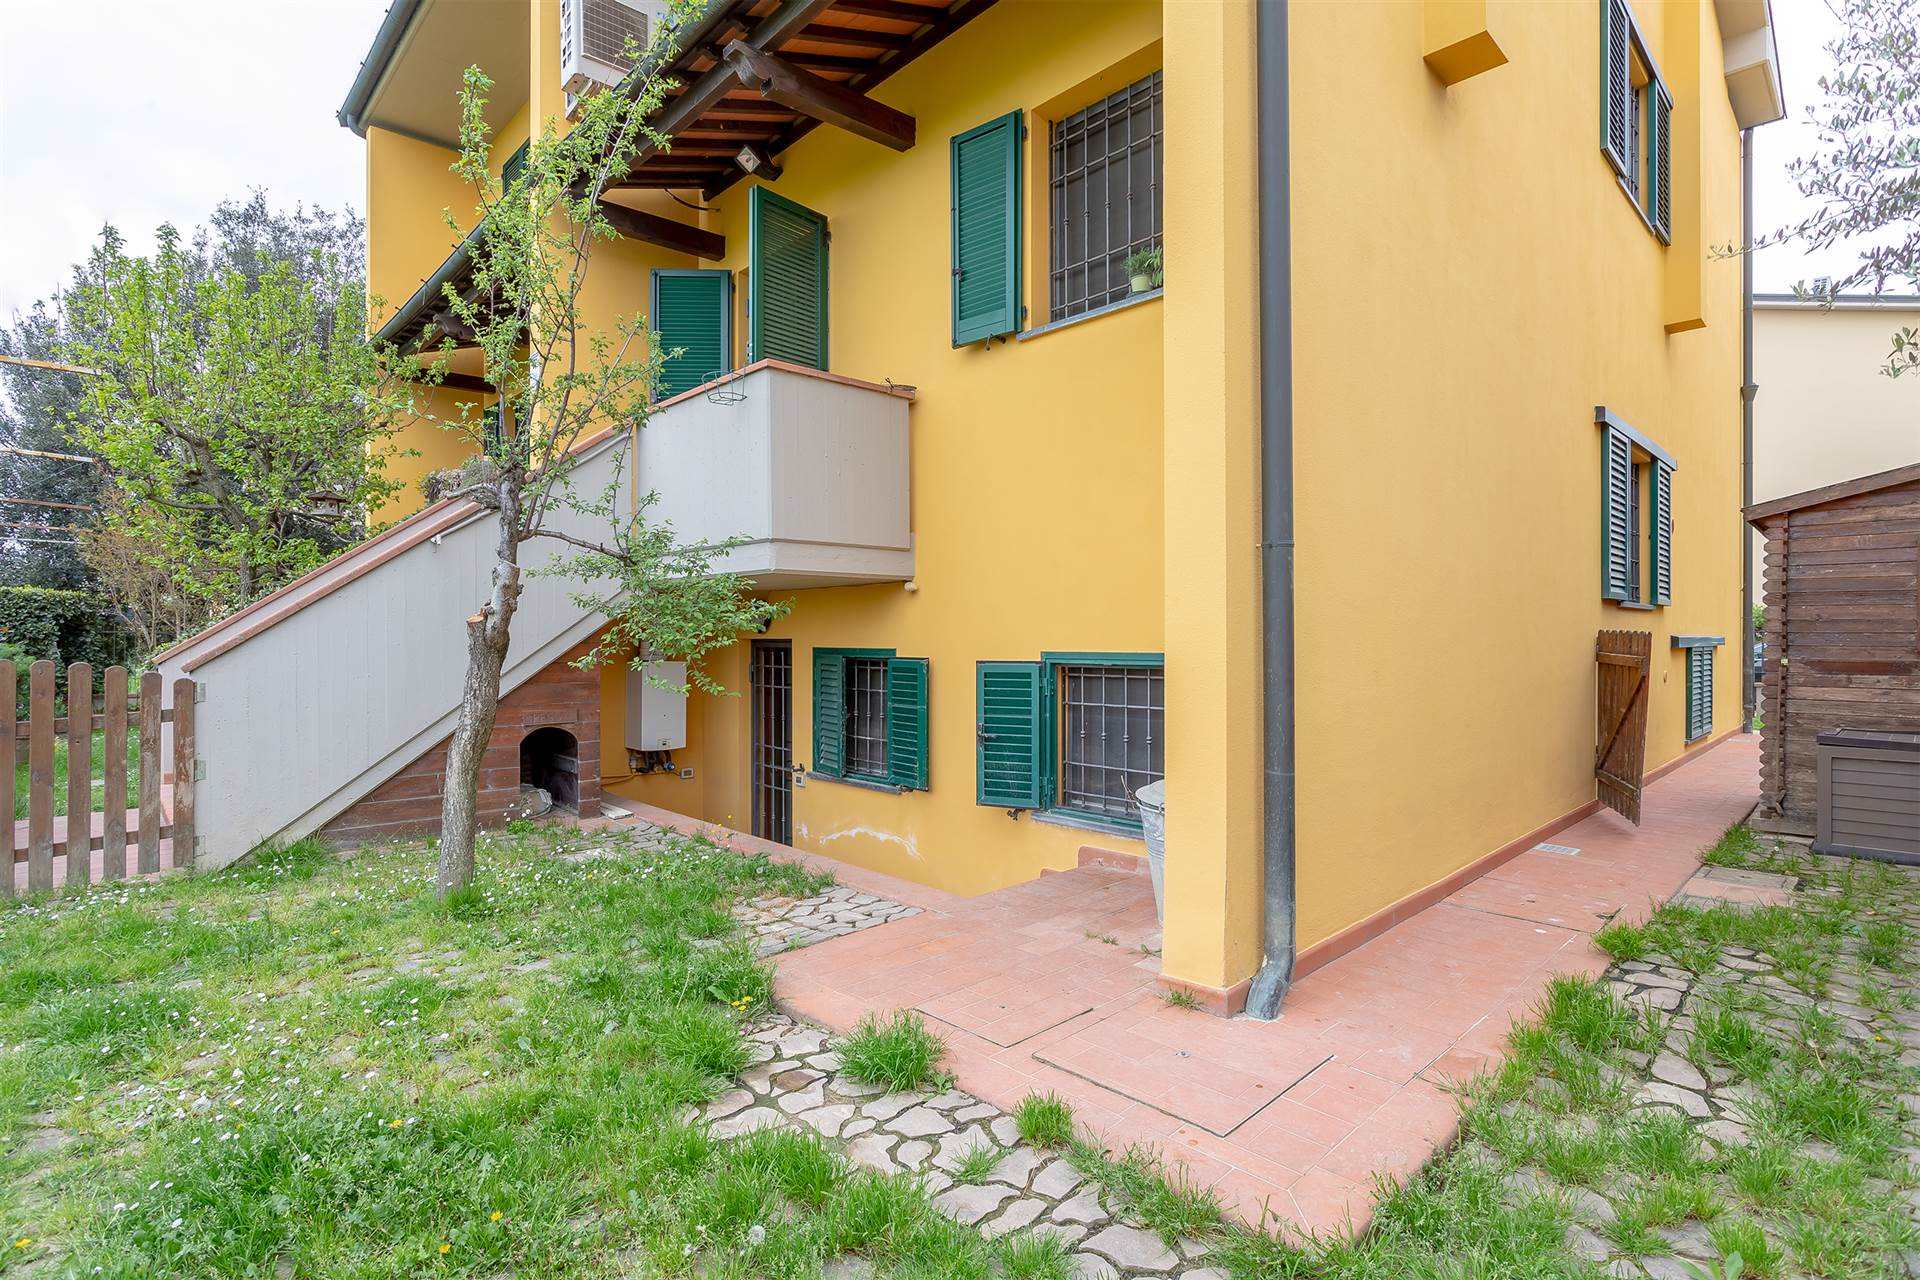 SAN GIUSTO, CAMPI BISENZIO, Terraced villa for sale of 125 Sq. mt., Excellent Condition, Heating Individual heating system, Energetic class: G, 